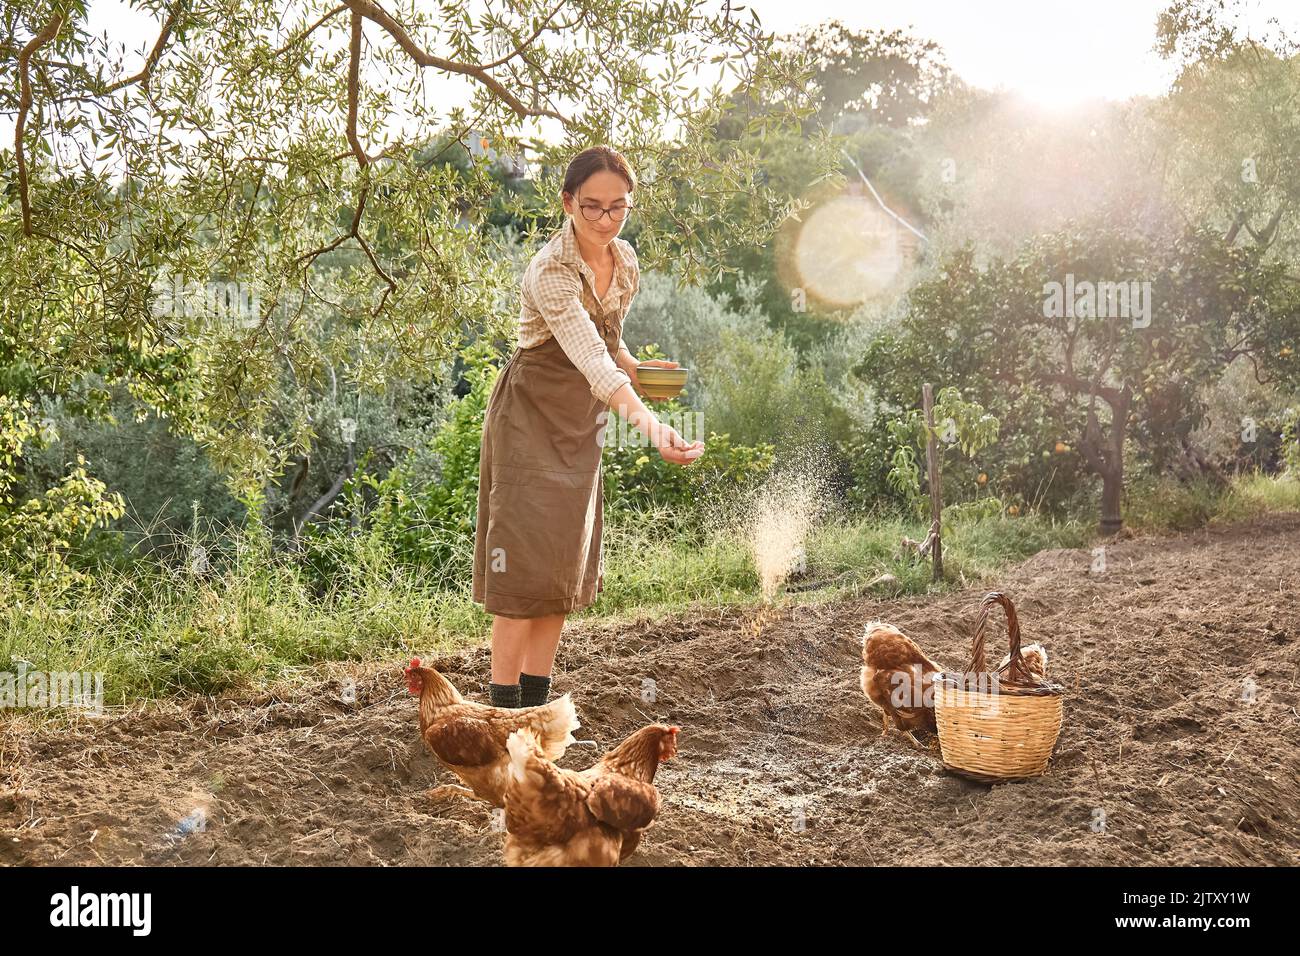 Woman feeding hens in the farm. Free-grazing domestic hen on a traditional free range poultry organic farm. Adult chicken walking on the soil. Stock Photo